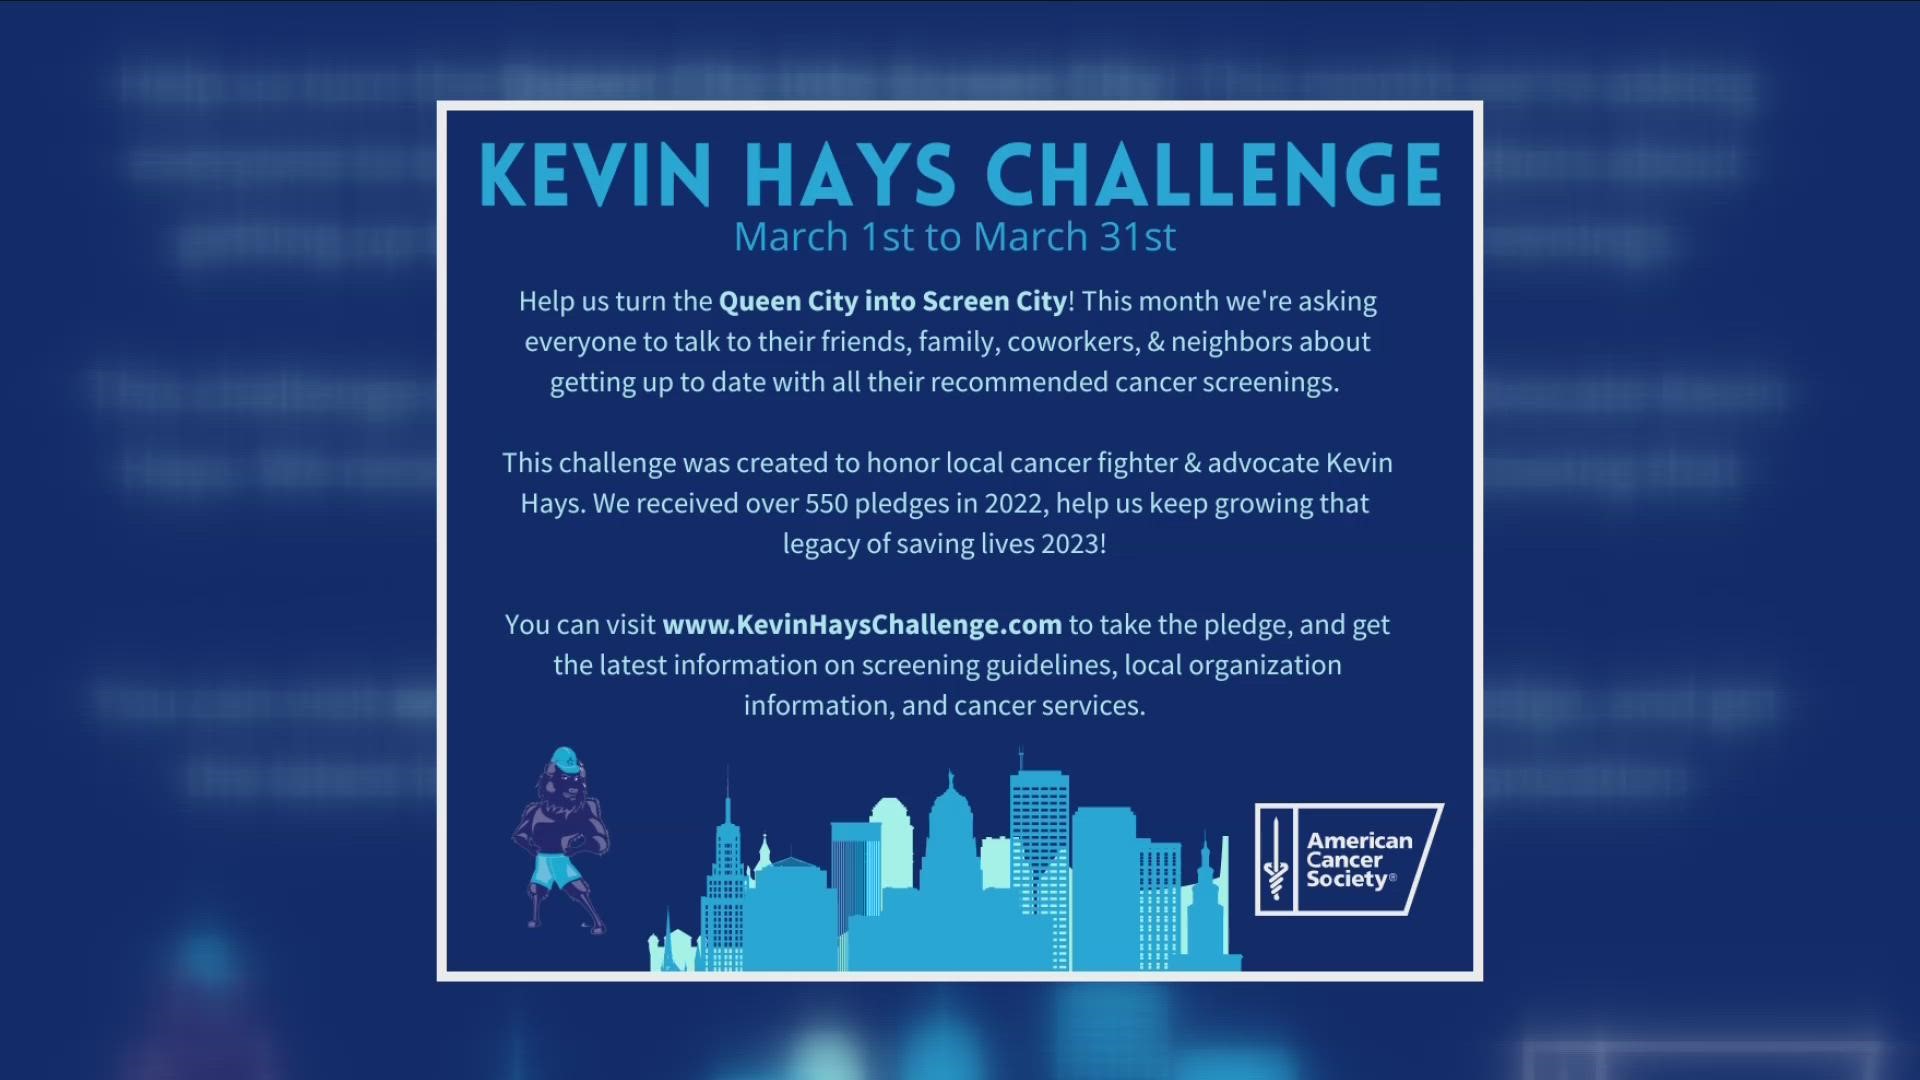 People are encouraged to sign up for the Kevin Hays Challenge and pledge to get their cancer screenings.